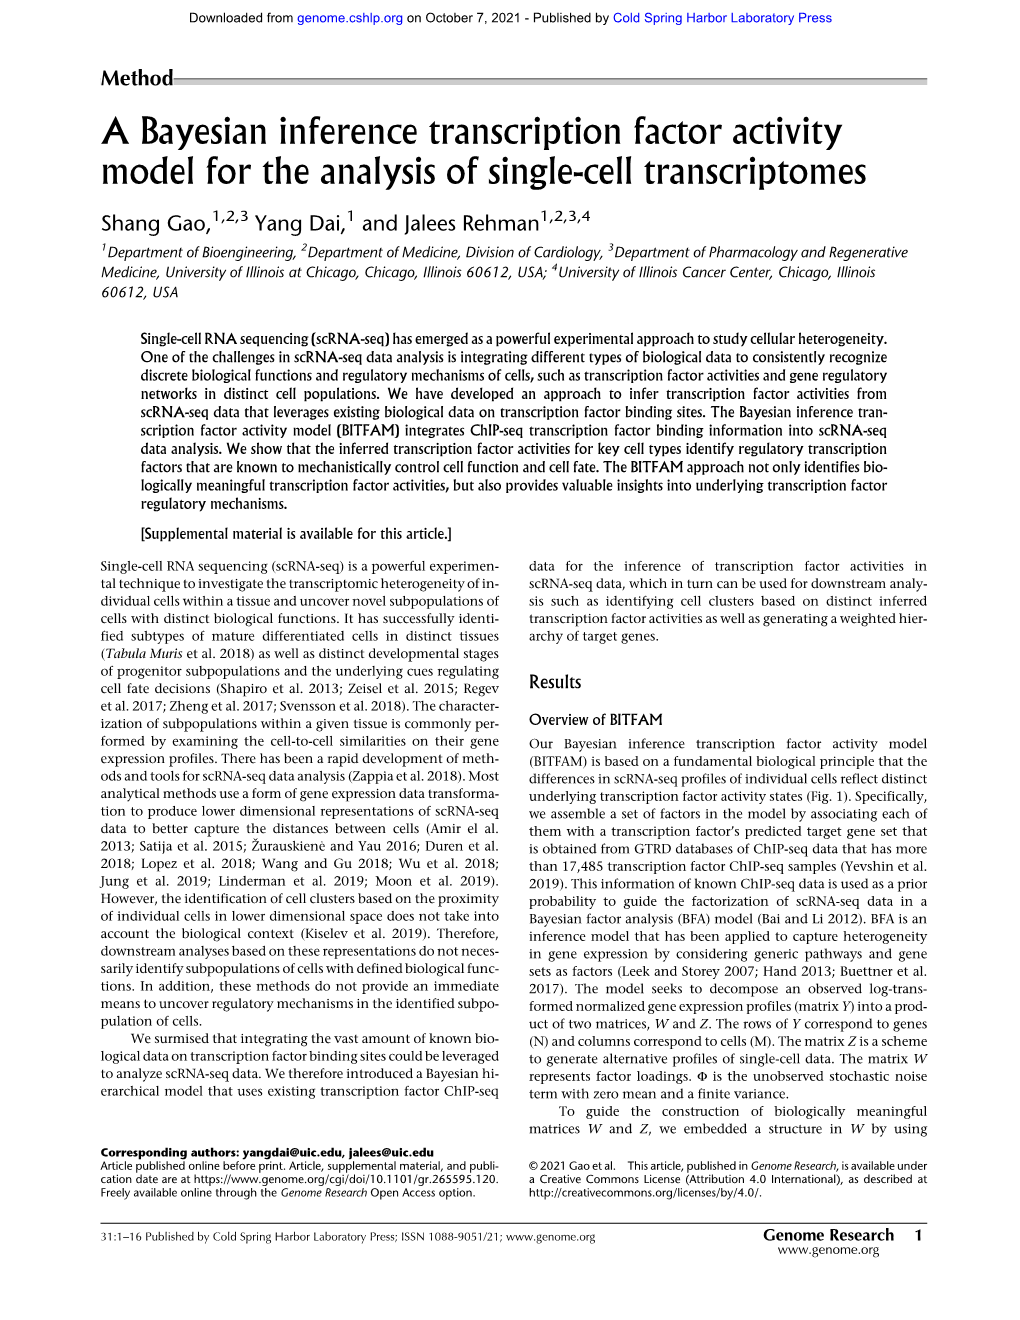 A Bayesian Inference Transcription Factor Activity Model for the Analysis of Single-Cell Transcriptomes